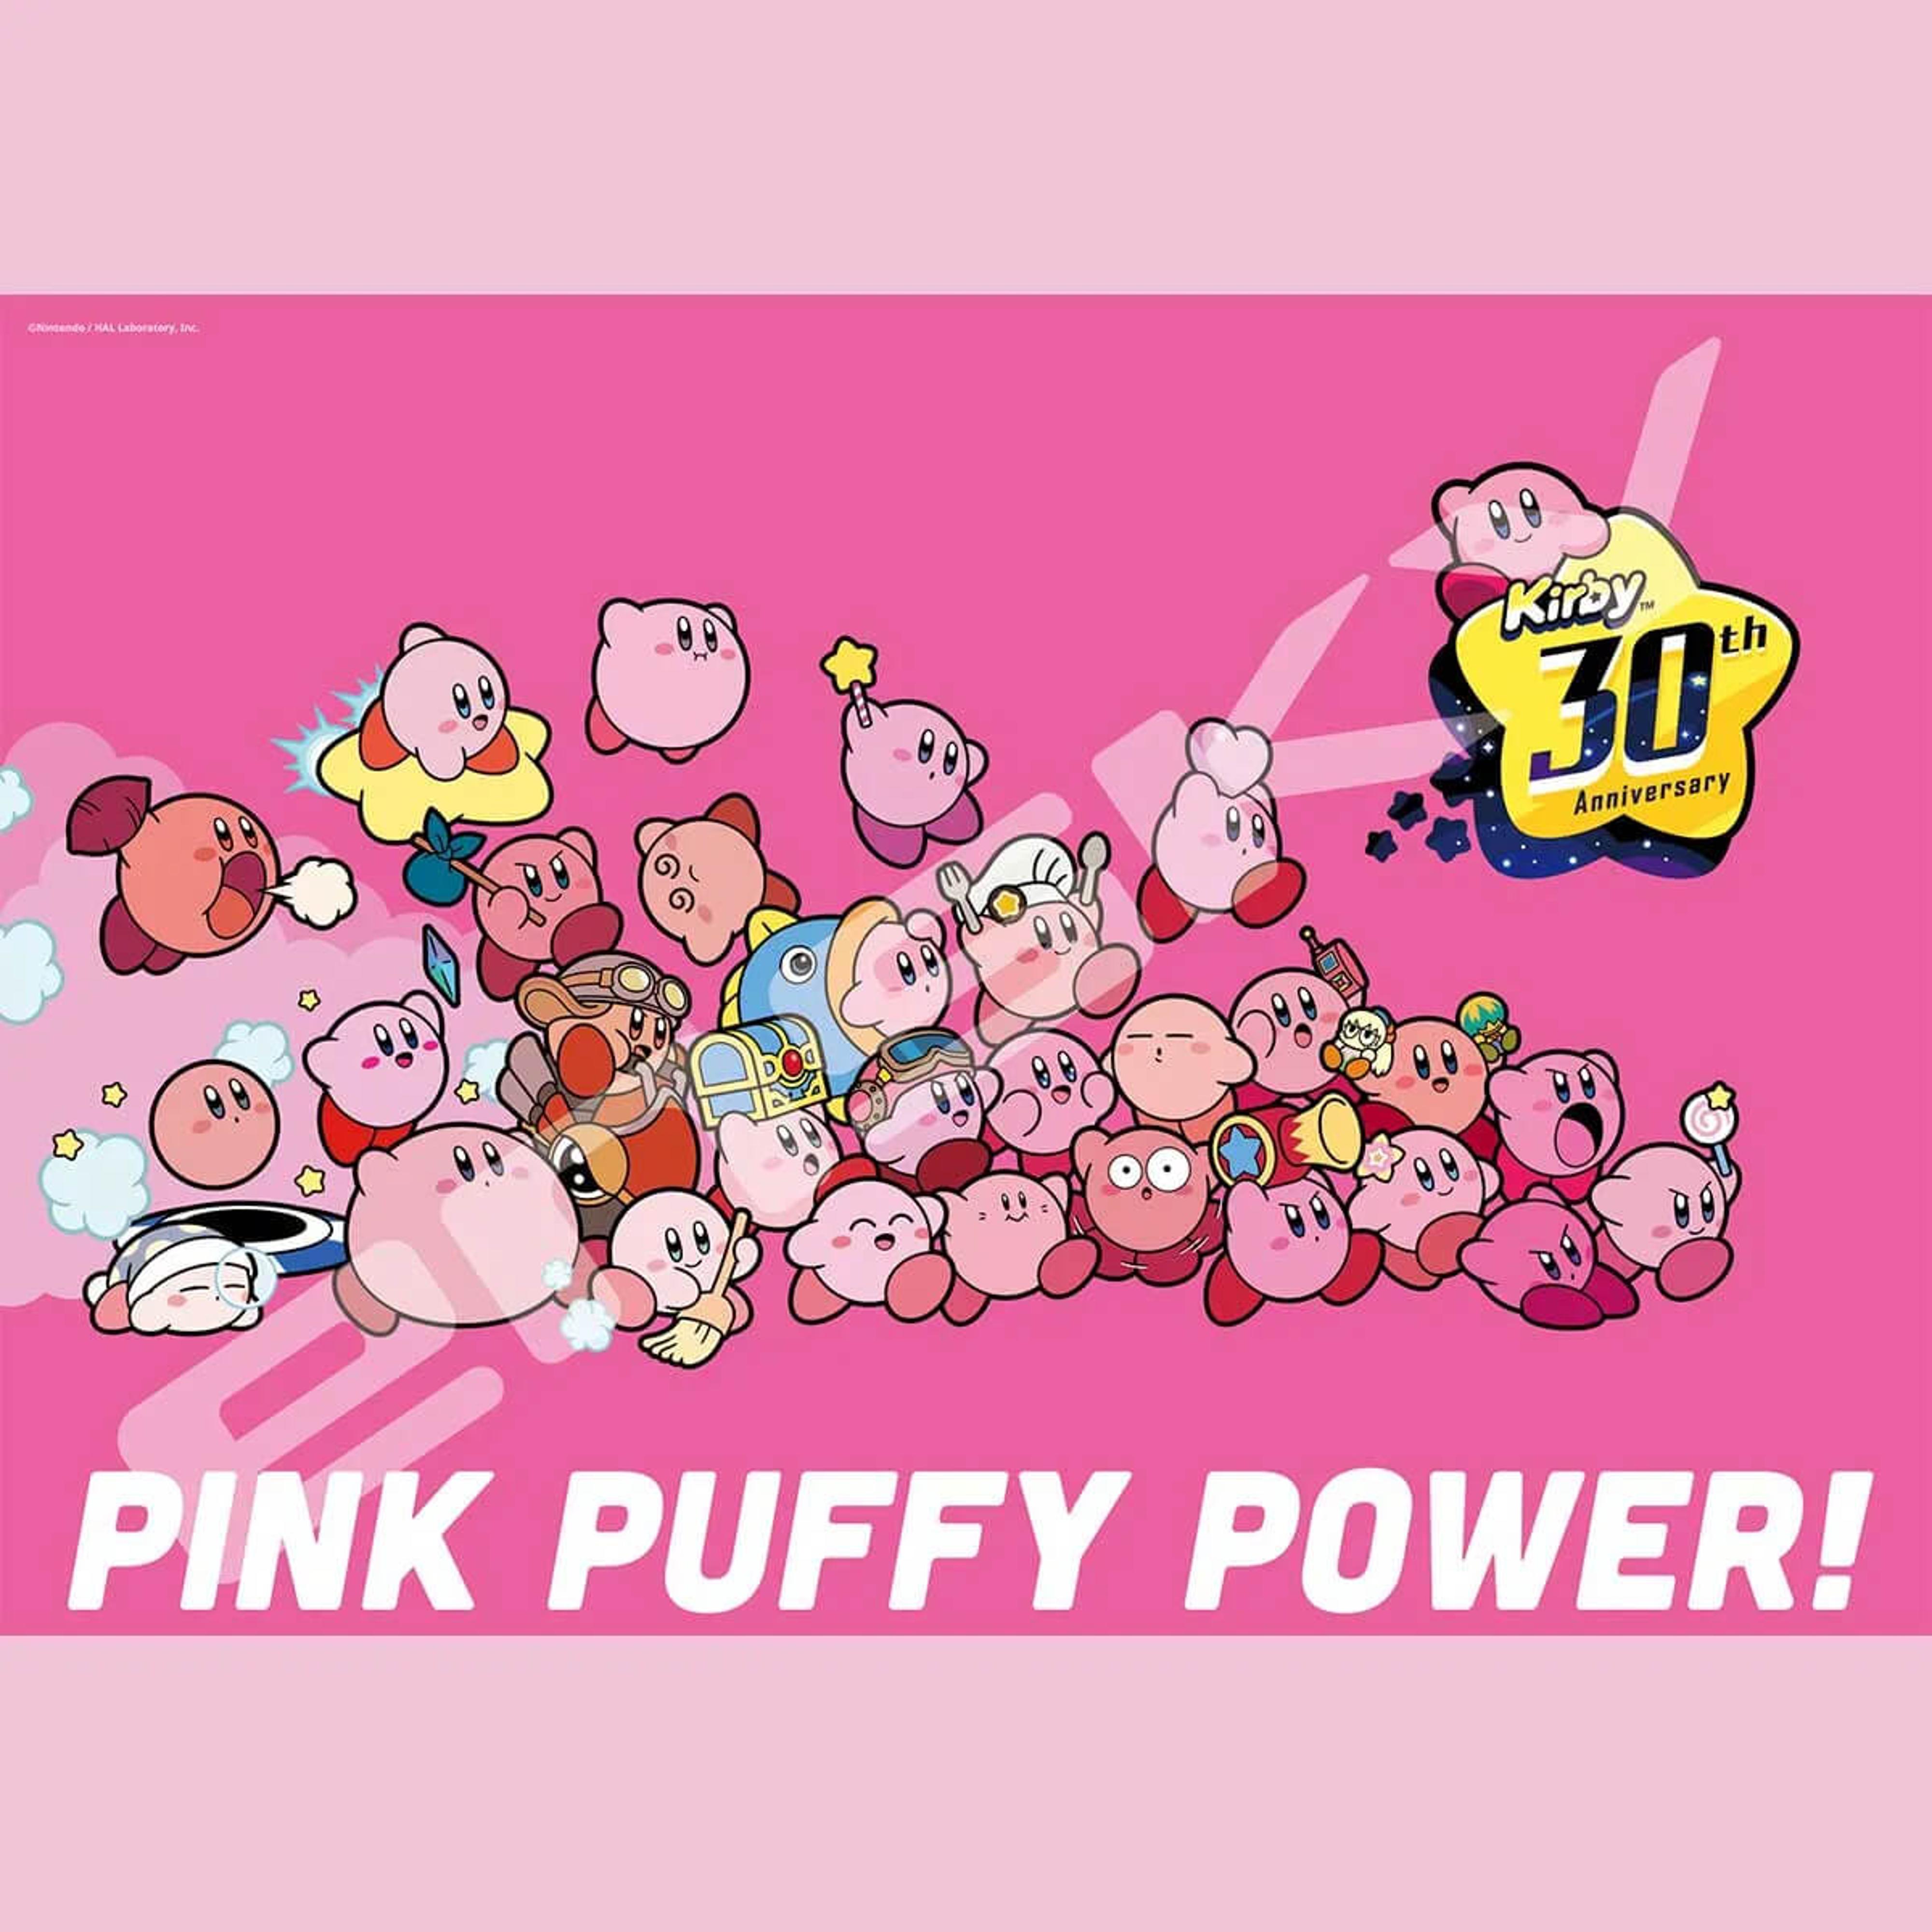 Kirby 30th Anniversary PINK PUFFY POWER Puzzle (1000 pc)